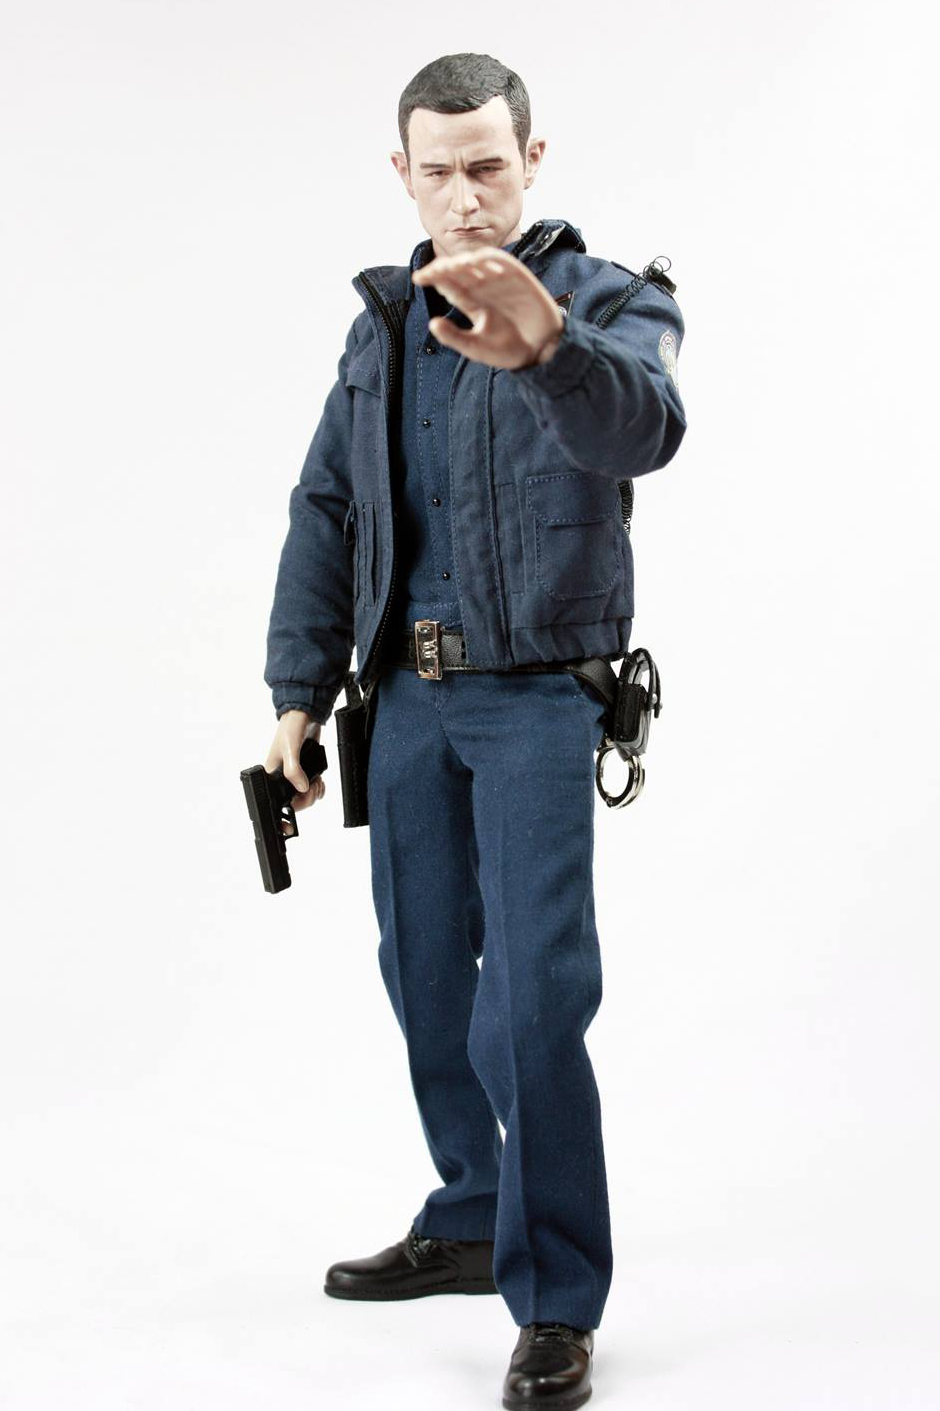 toyhaven: AC Play 1/6th scale US Police Uniform Set is meant for 12